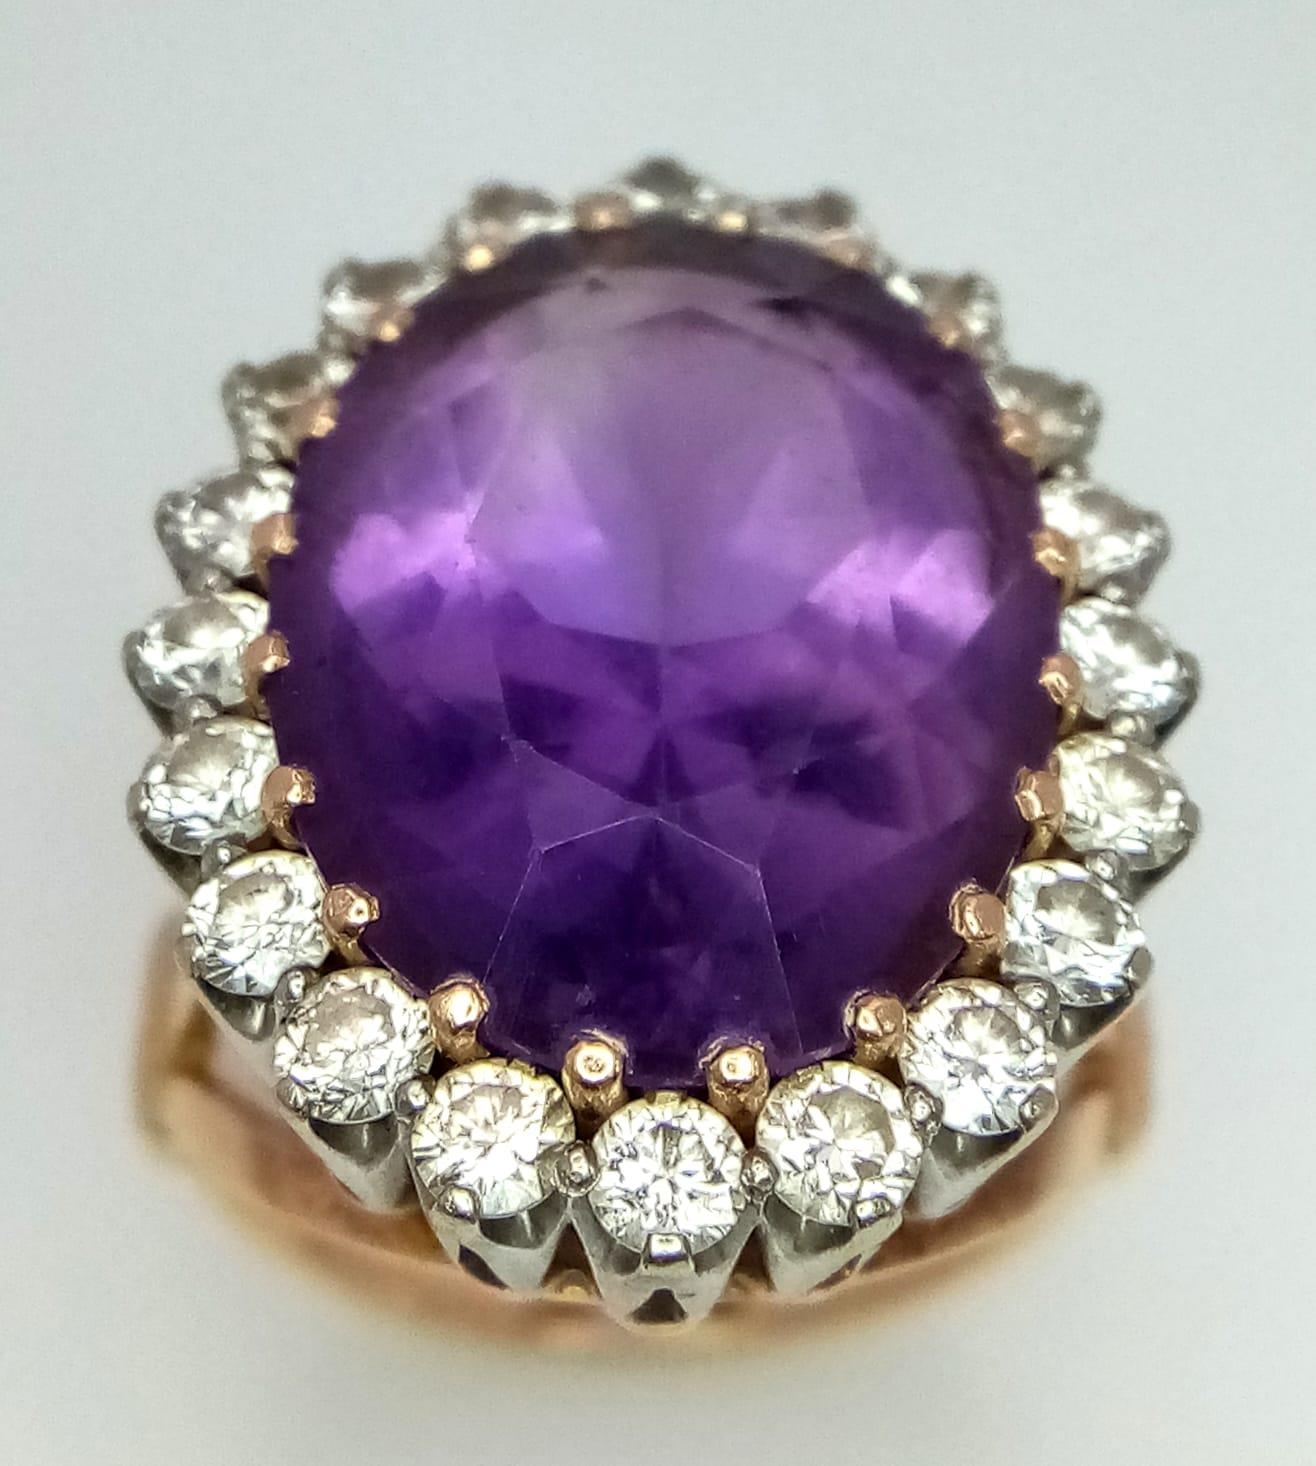 AN 18K YELLOW GOLD DIAMOND & PURPLE STONE ( BELIEVED TO BE AMETHYST ) COCKTAIL RING, WITH A LARGE